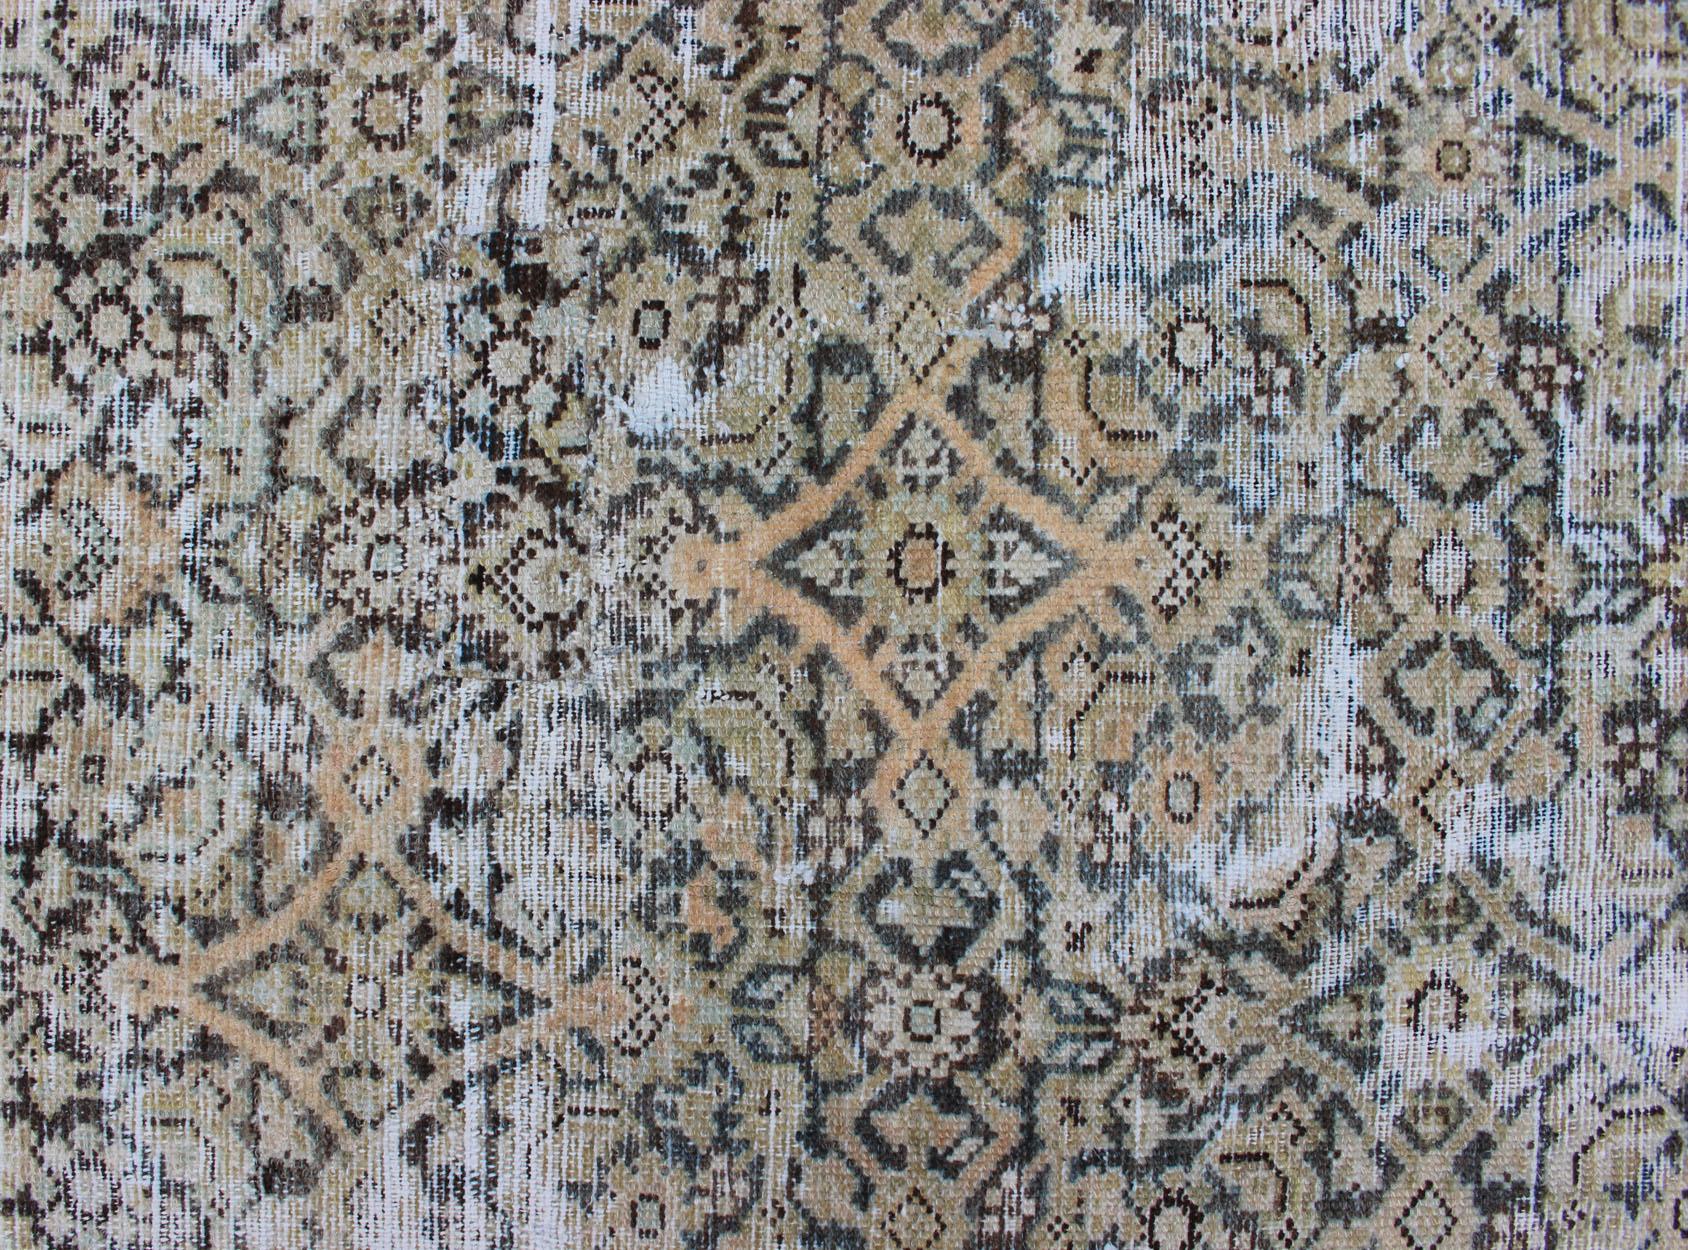 Large Gallery Persian Malayer Runner with Herati Design in Gray and Earth Tones 4